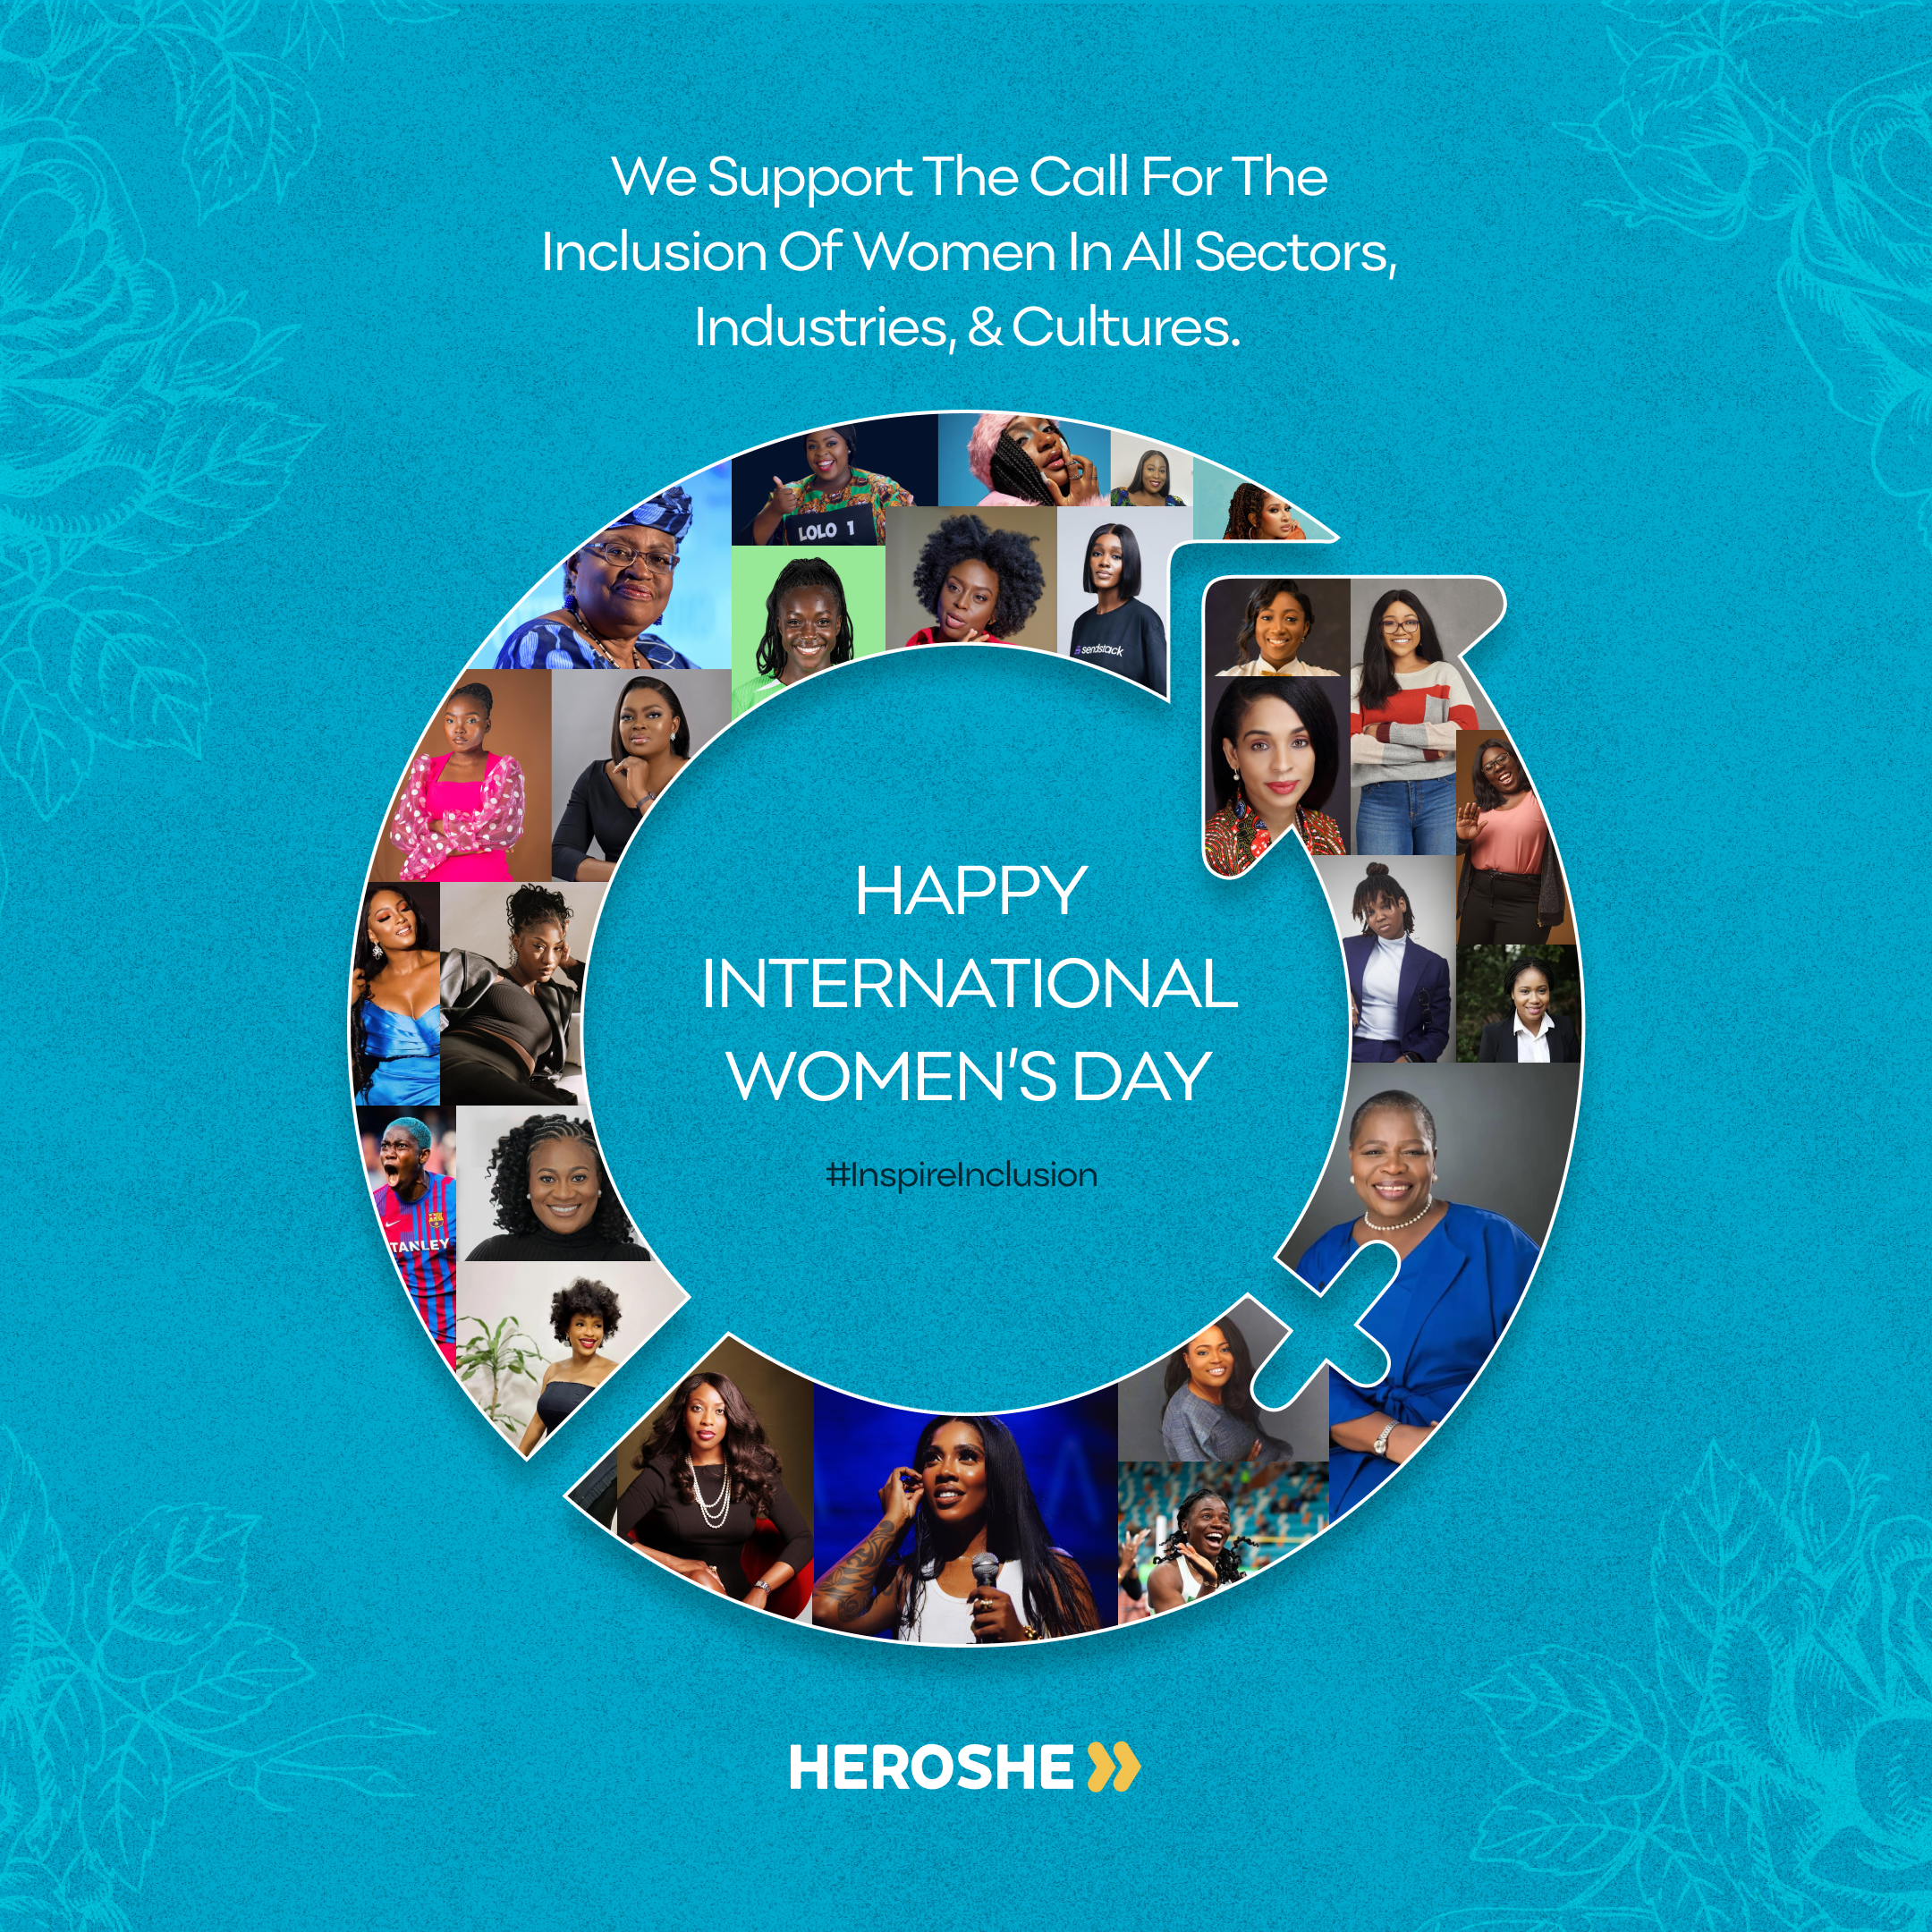 Celebrating 20 Remarkable Women Making a Difference This IWD